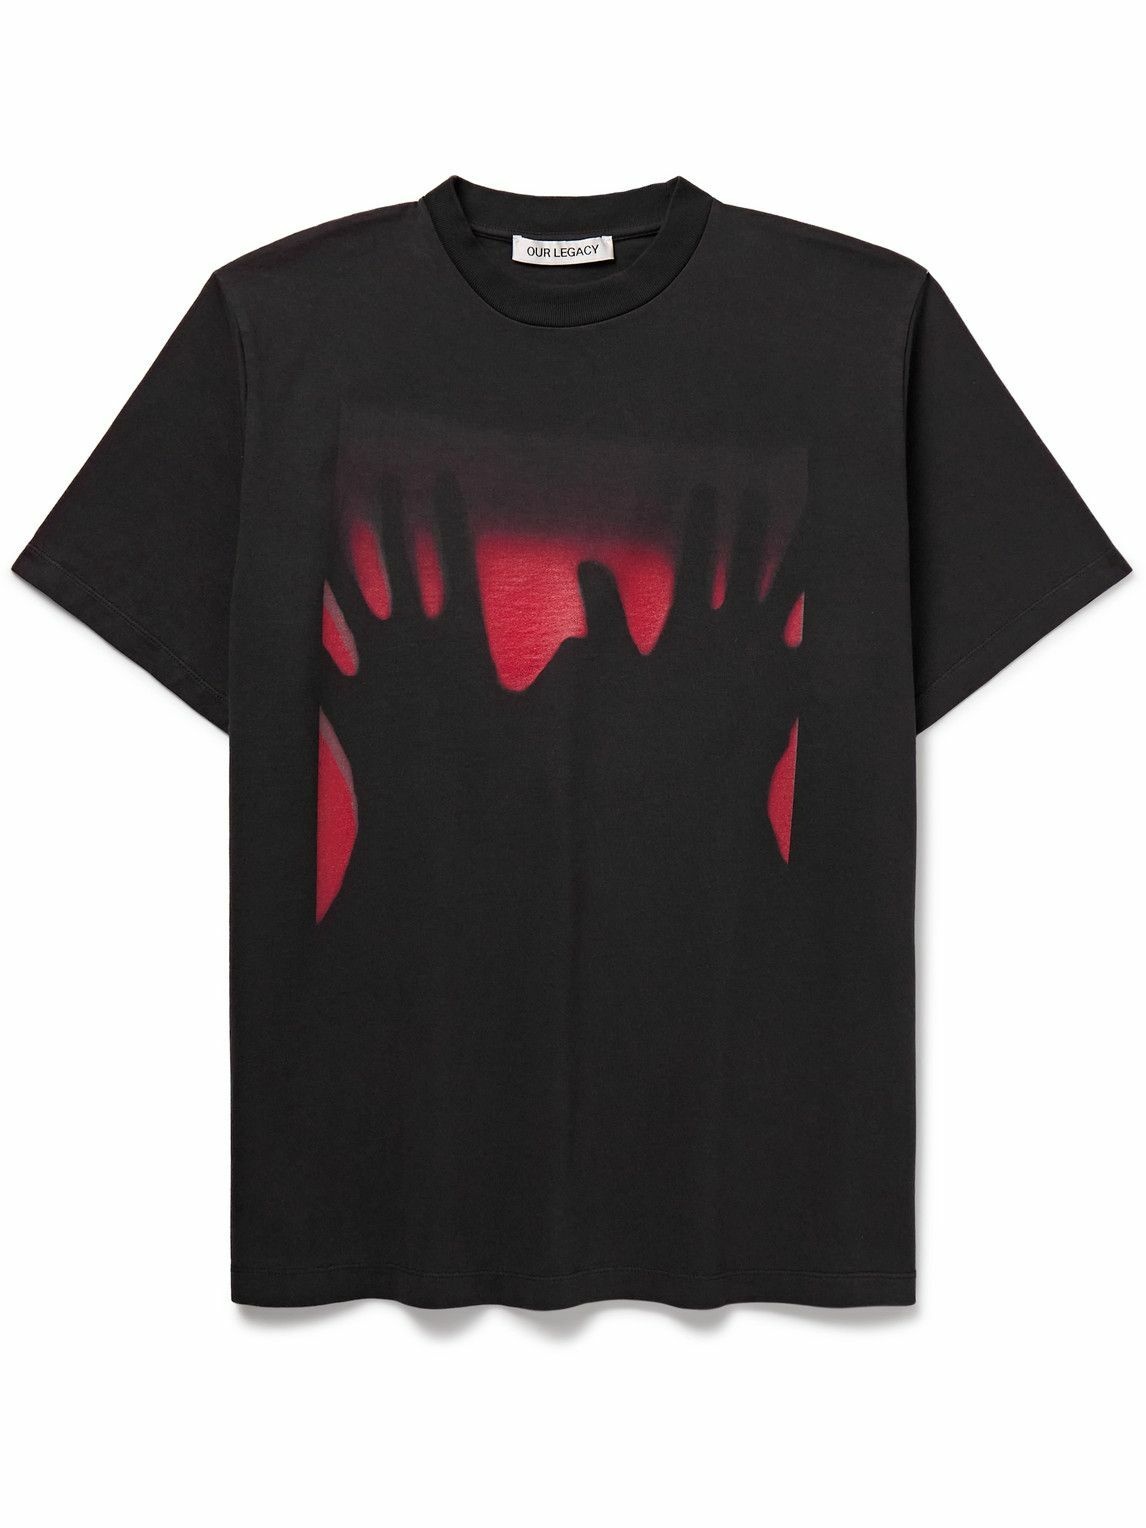 Photo: Our Legacy - Red Taste of Hands Printed Appliquéd Cotton-Jersey T-Shirt - Black